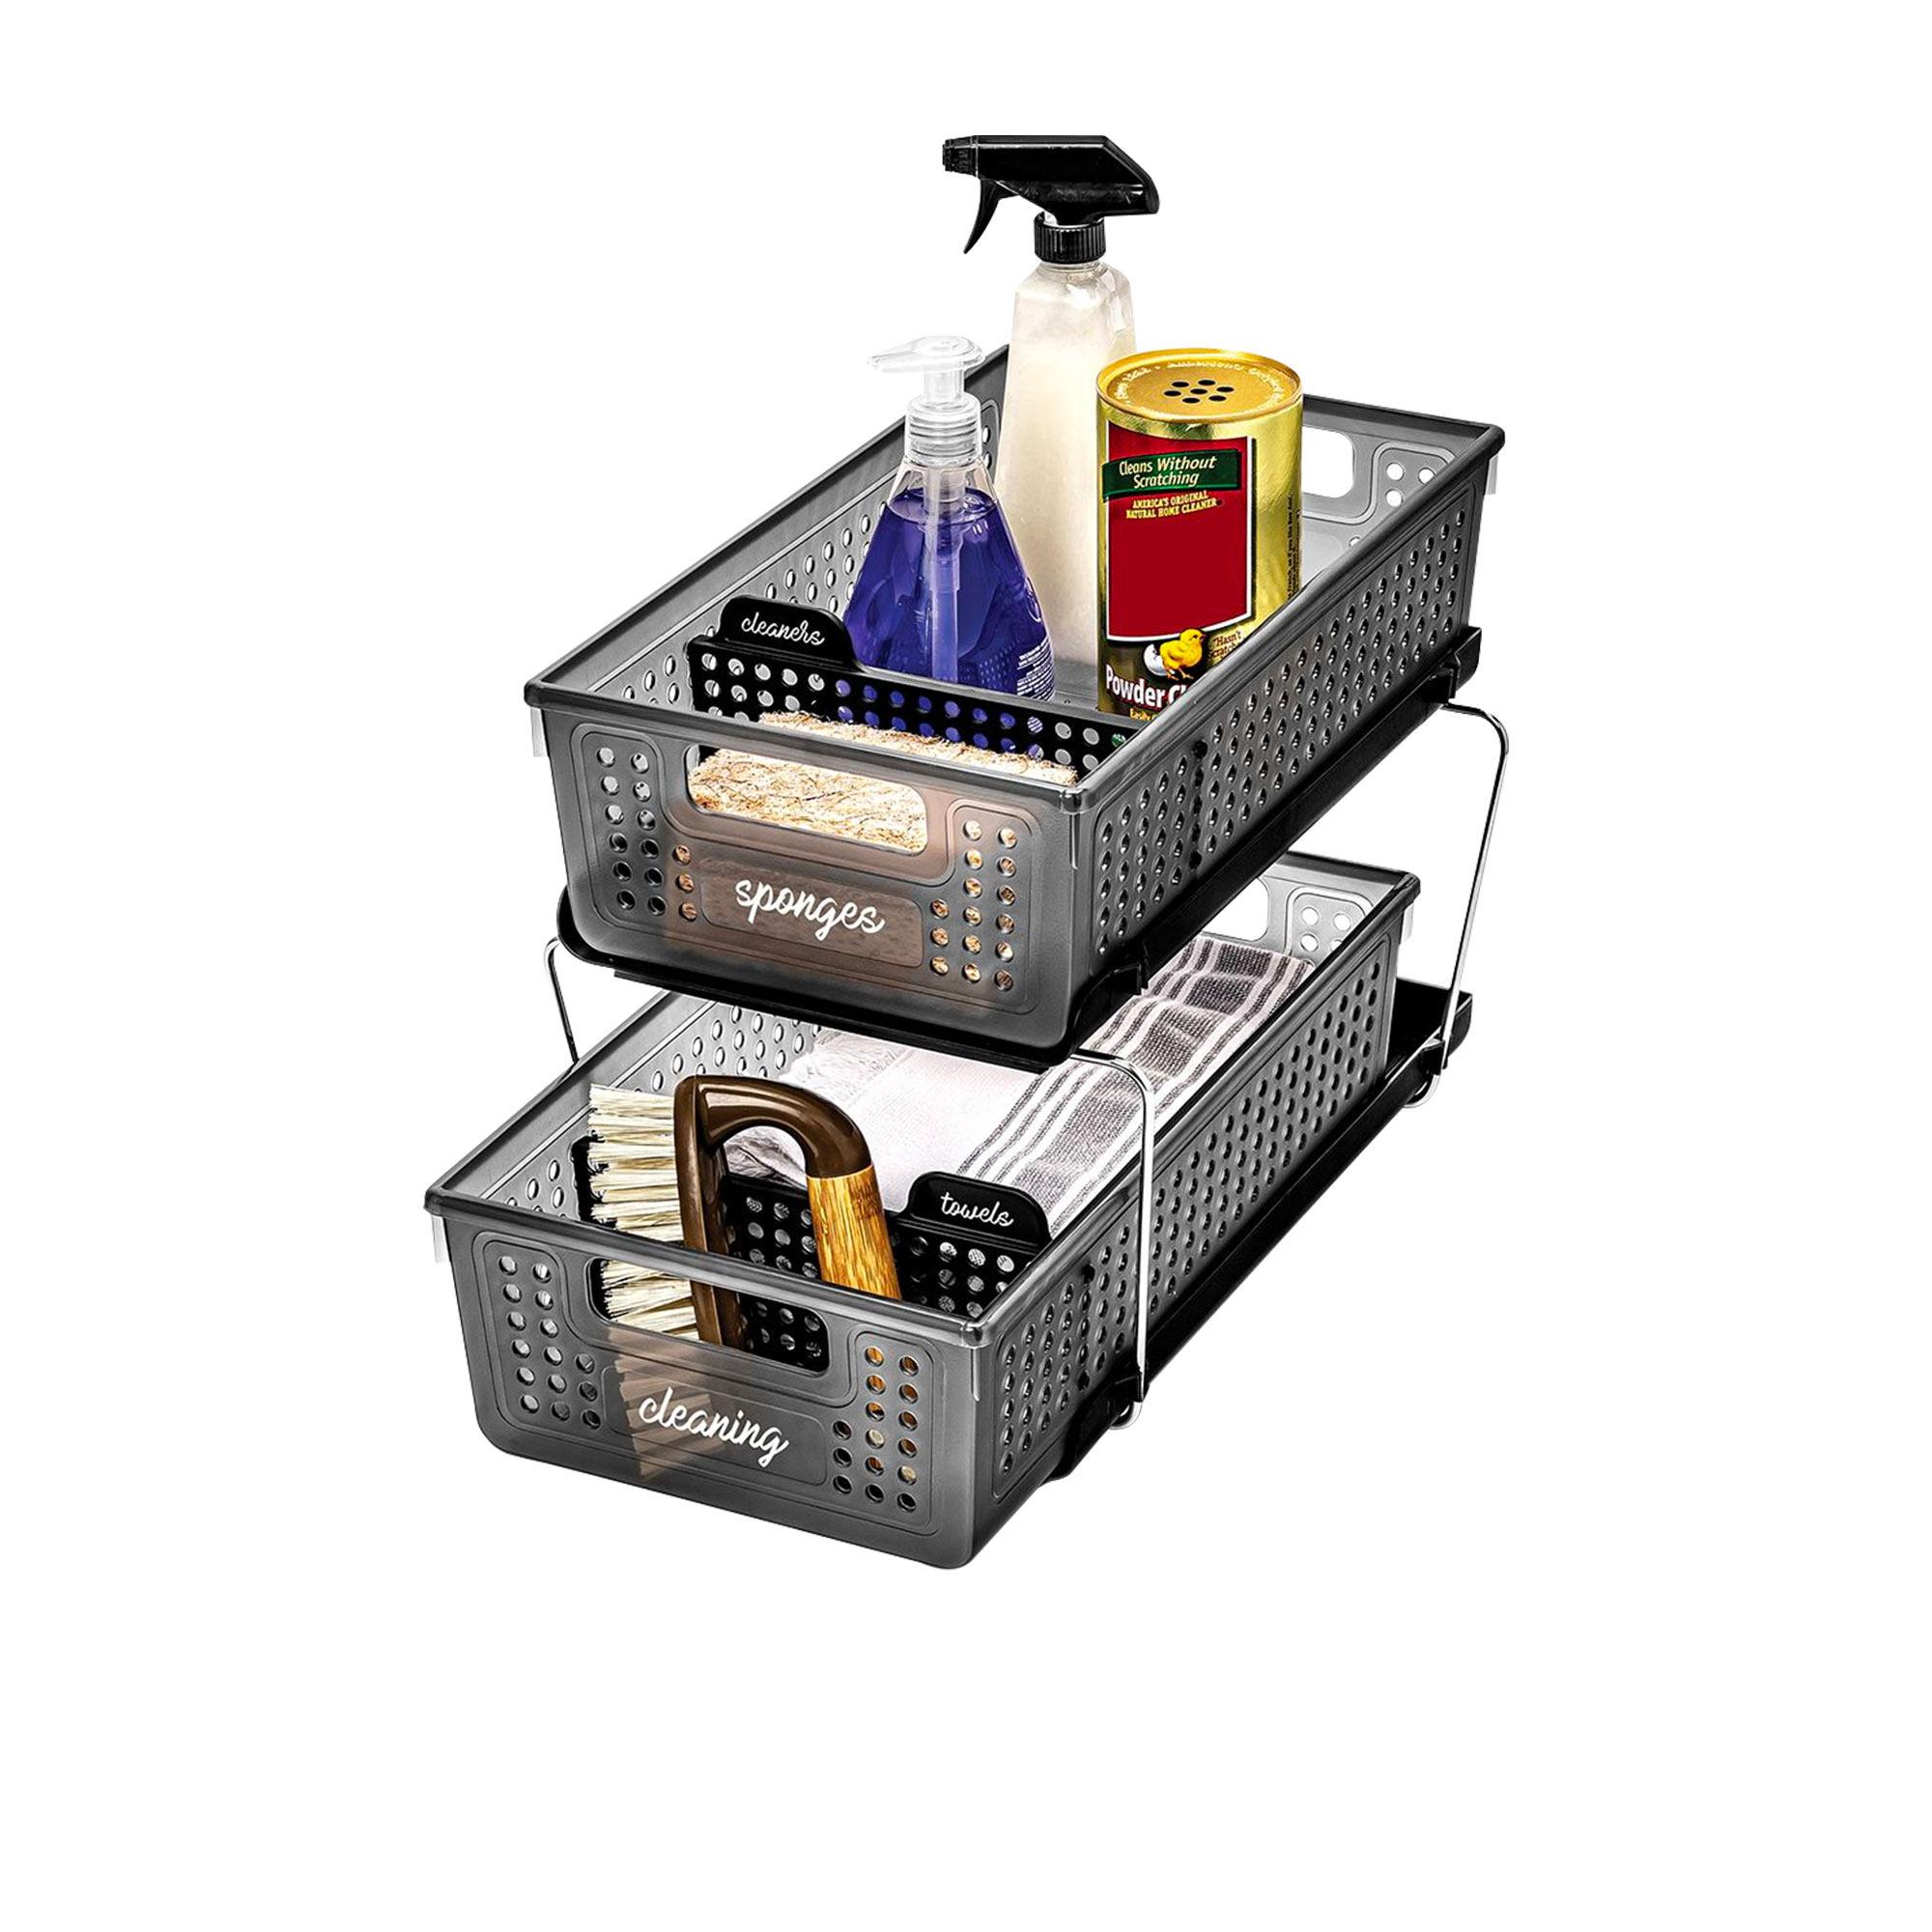 Madesmart 2 Tier Organiser with Dividers Carbon Image 5